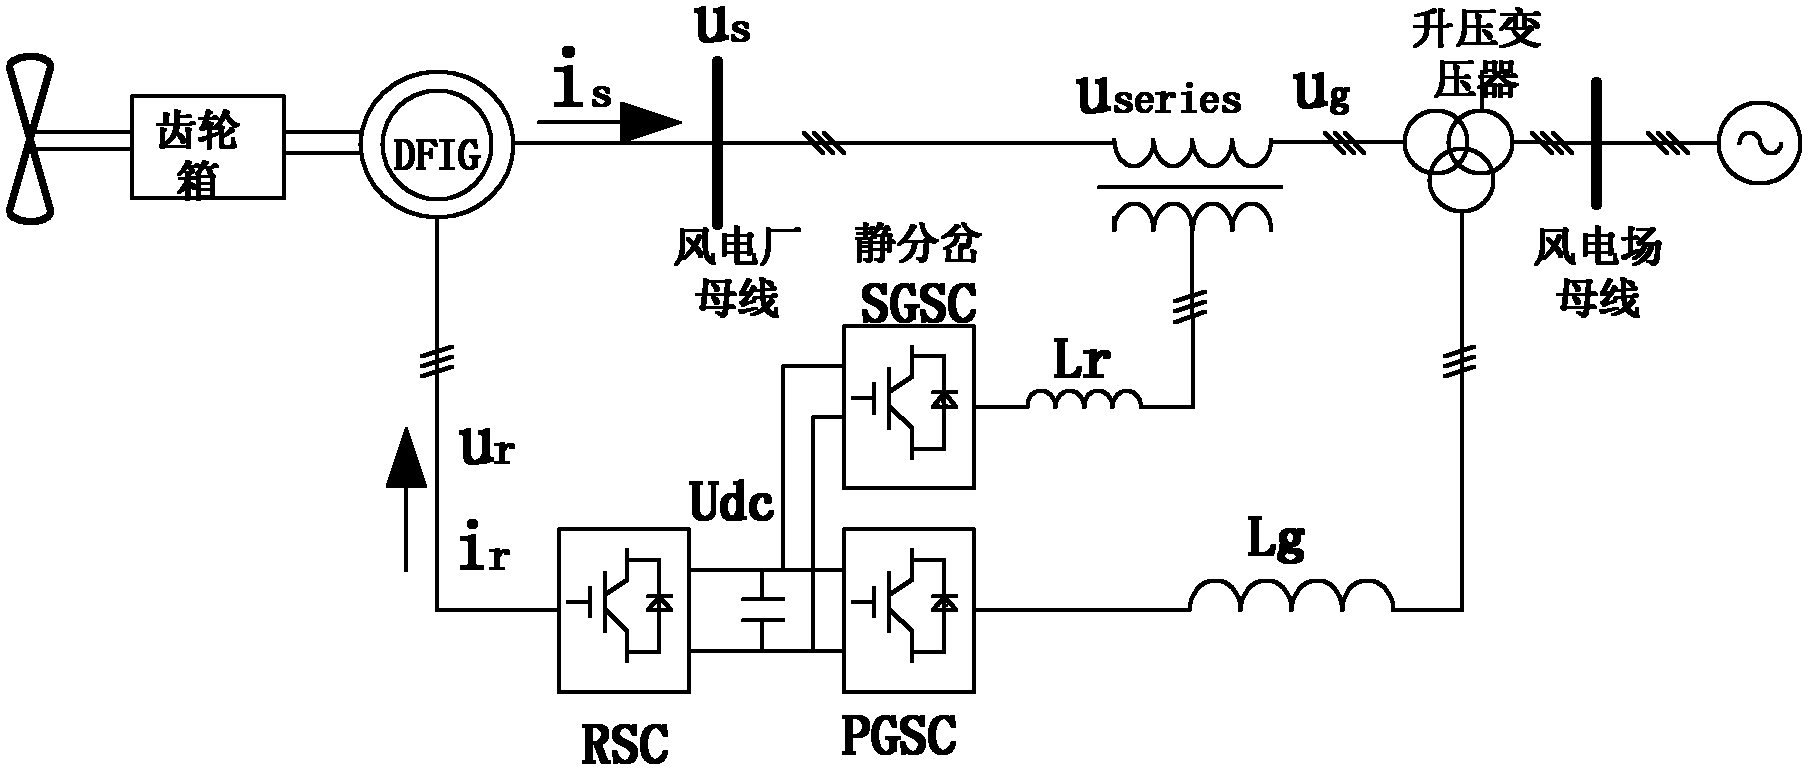 A dfig wind power system low voltage ride through control method based on static bifurcation control sgsc